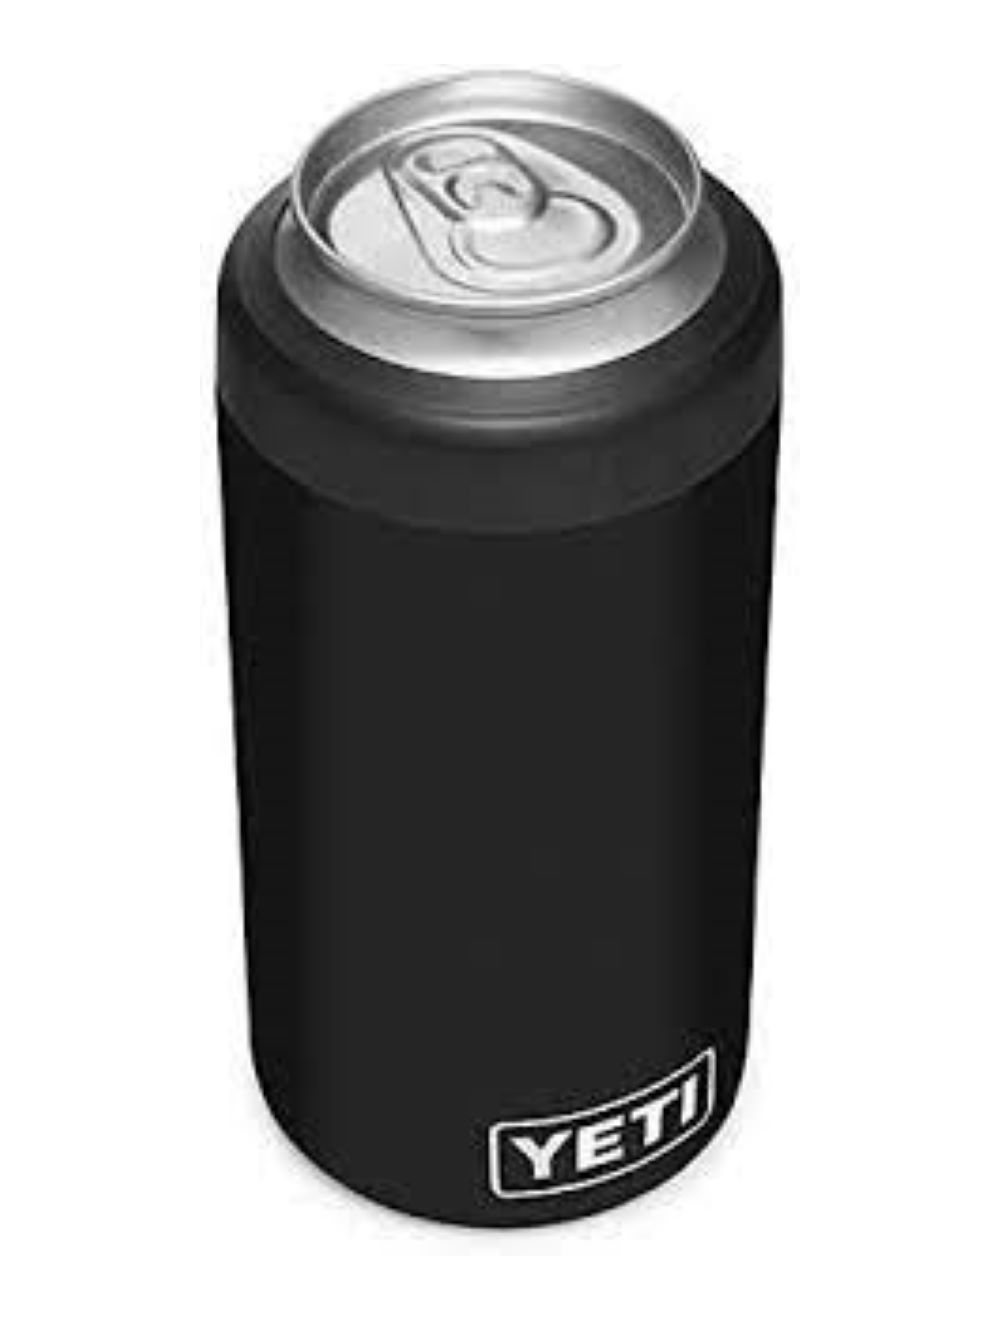 Yeti Rambler 16 Oz Colster Tall Can Cooler White